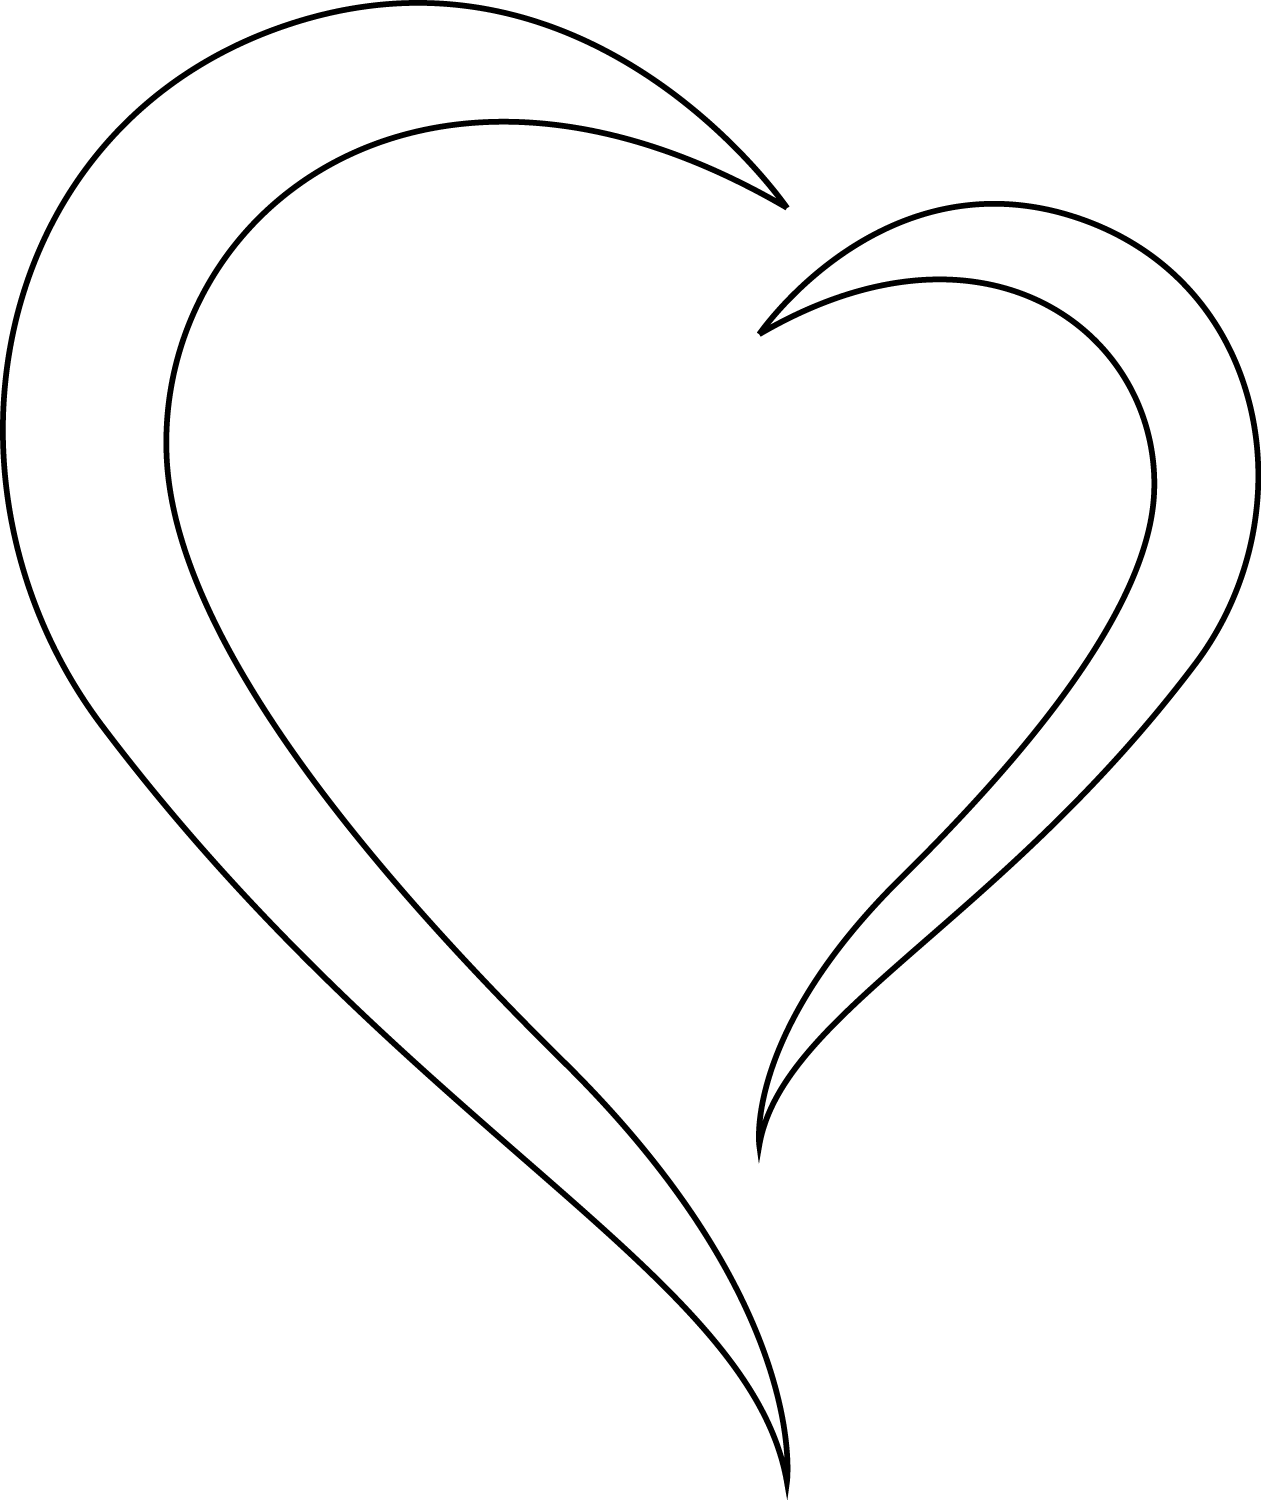 Stylized Heart Coloring Page